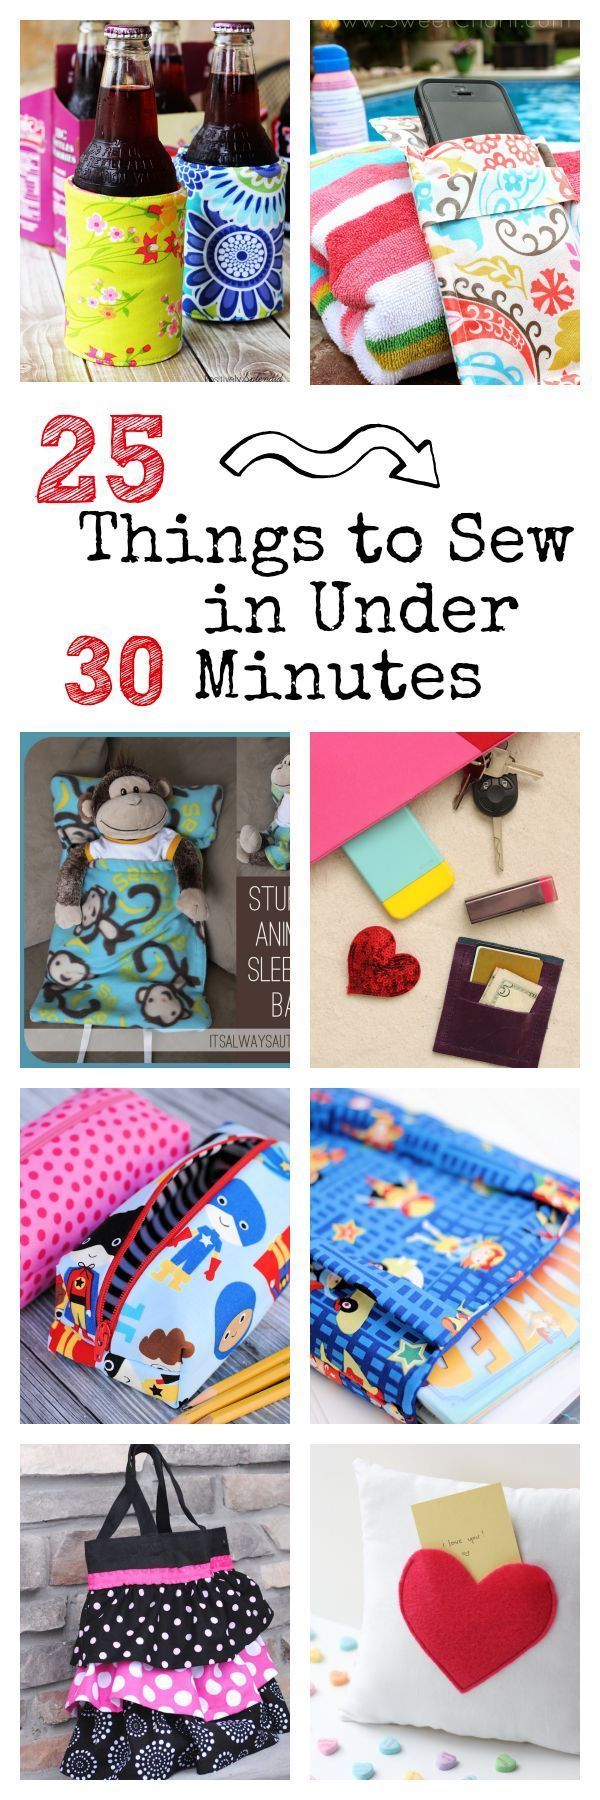 25 Things to Sew in Under 30 Minutes-Quick & Easy DIY sewing projects. Fabulous ideas for homemade Christmas gifts this holiday.